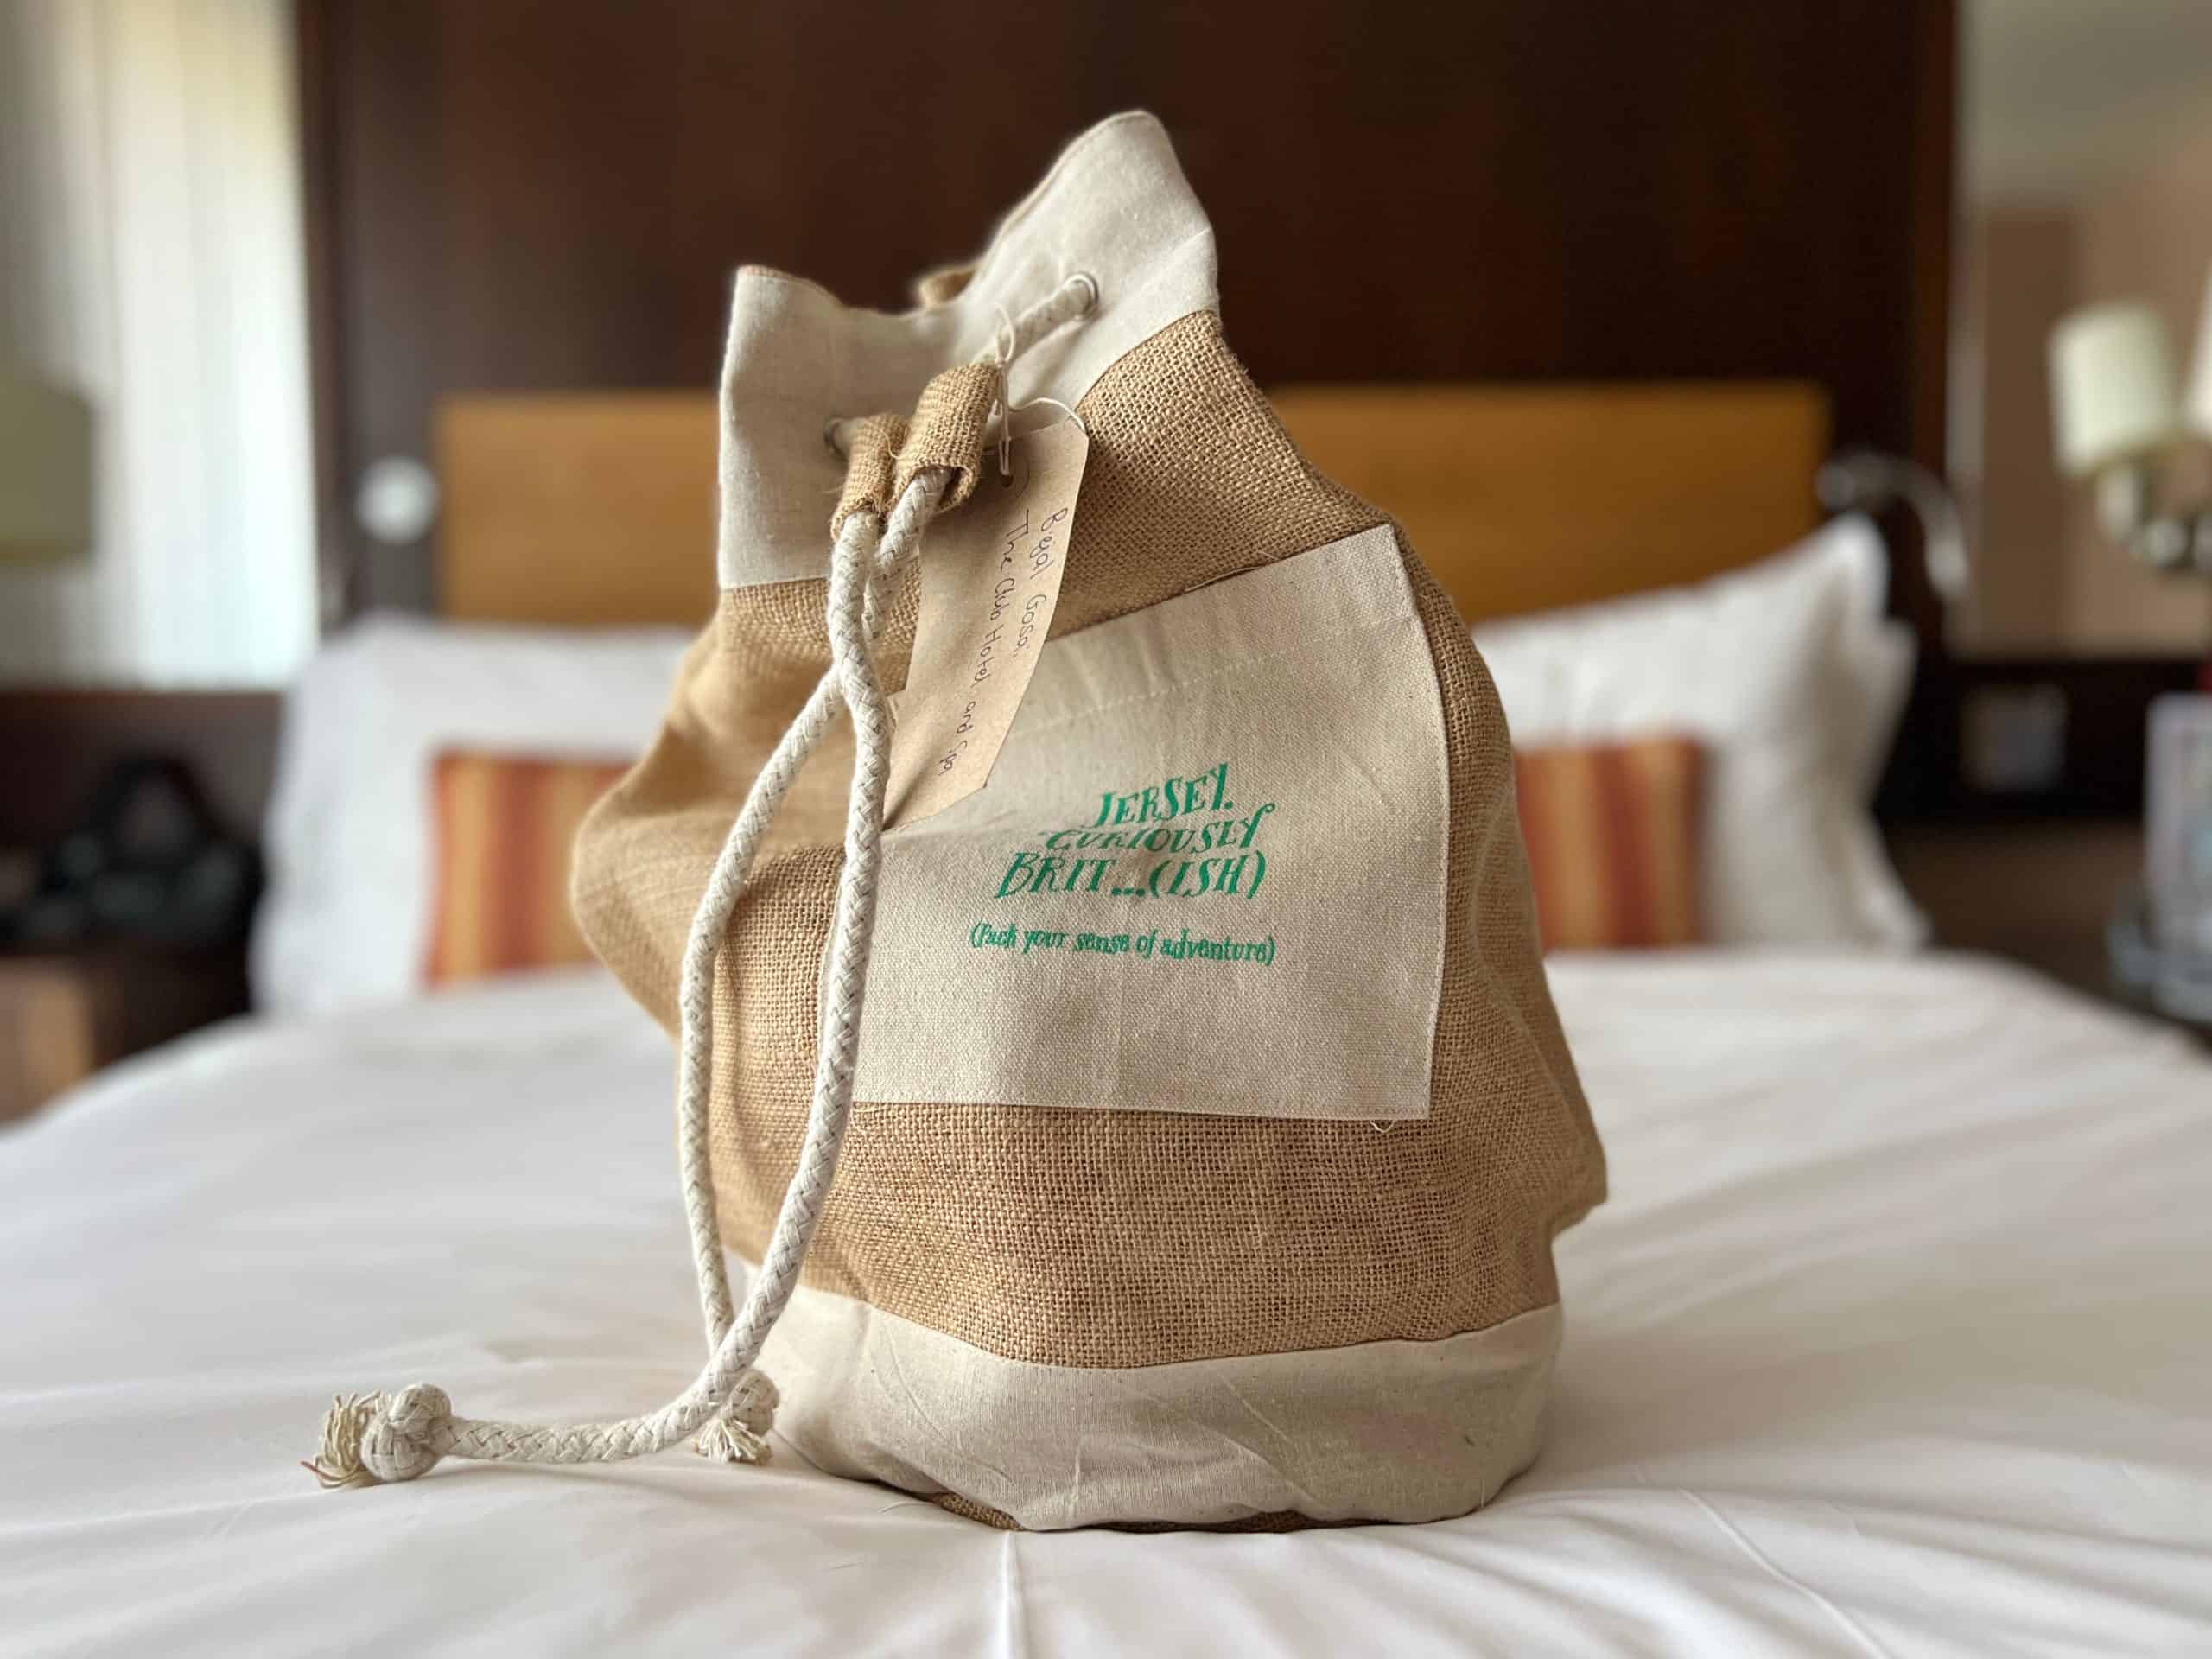 Sustainable Jersey: Visit Jersey hessian bag on bed